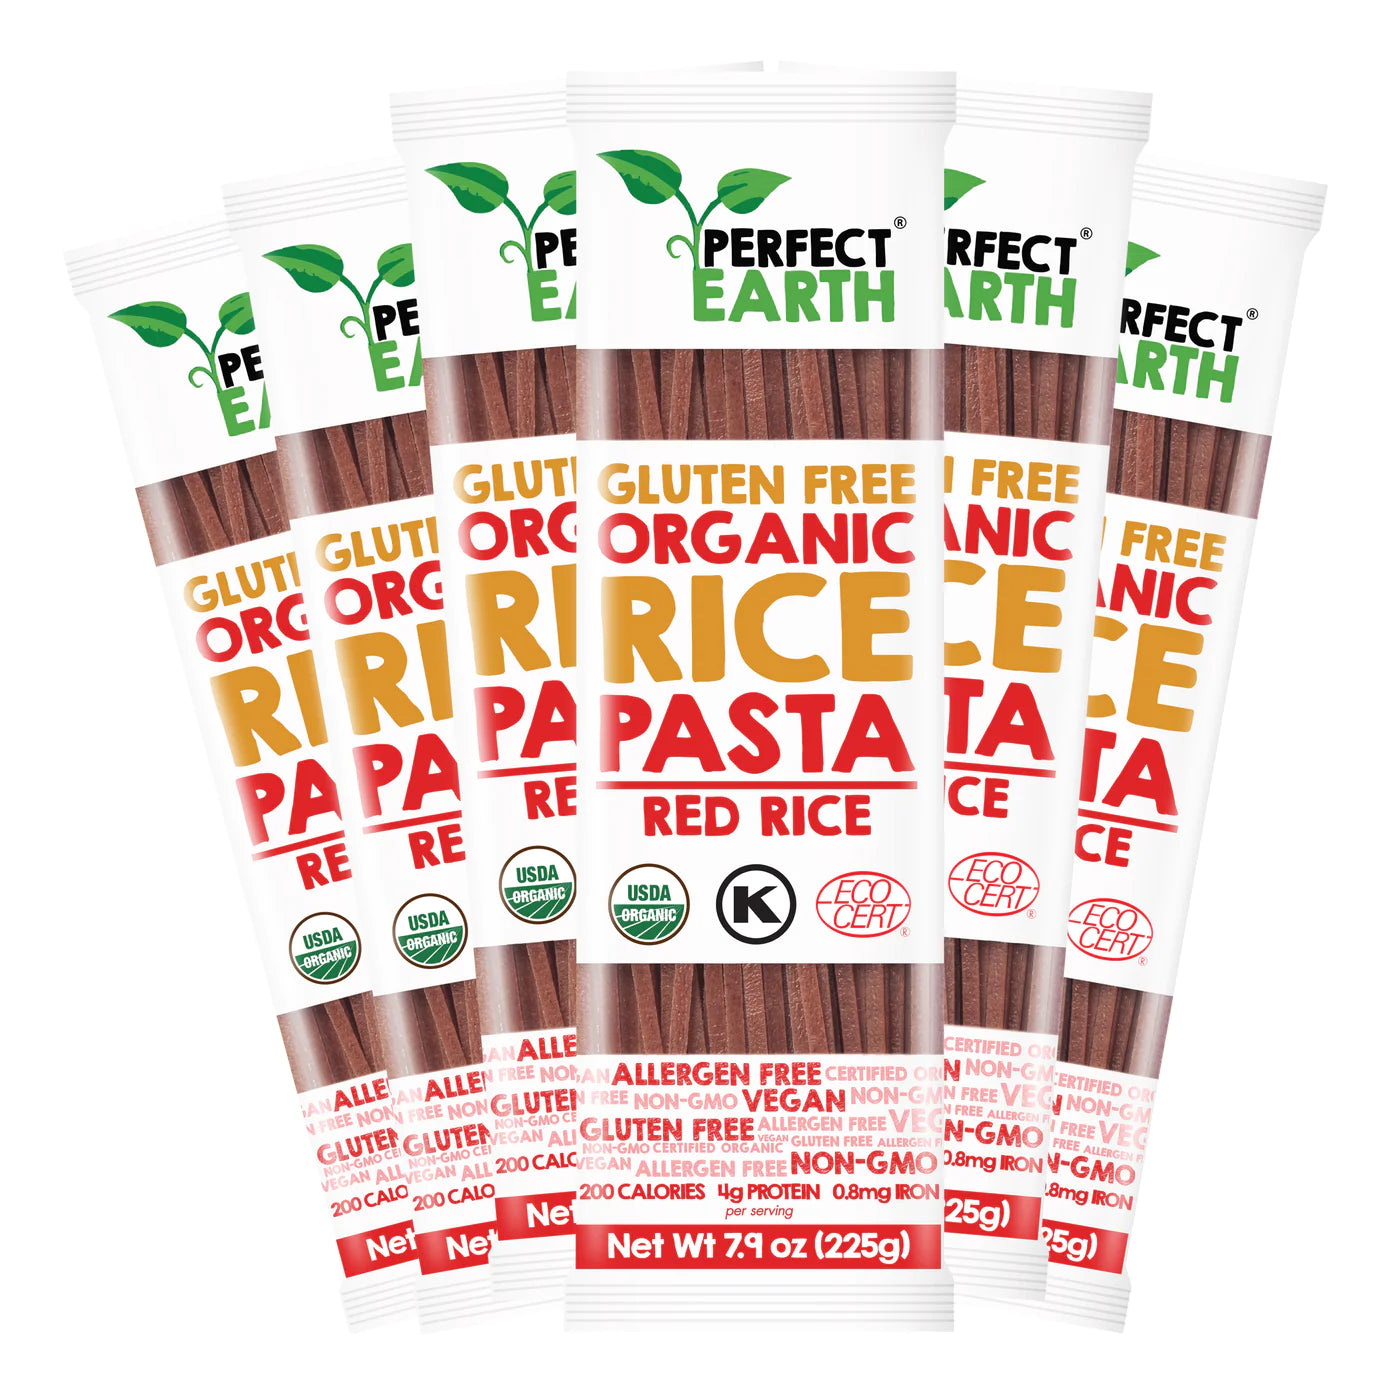 Perfect Earth - Organic Rice Pasta Red Rice - 225g